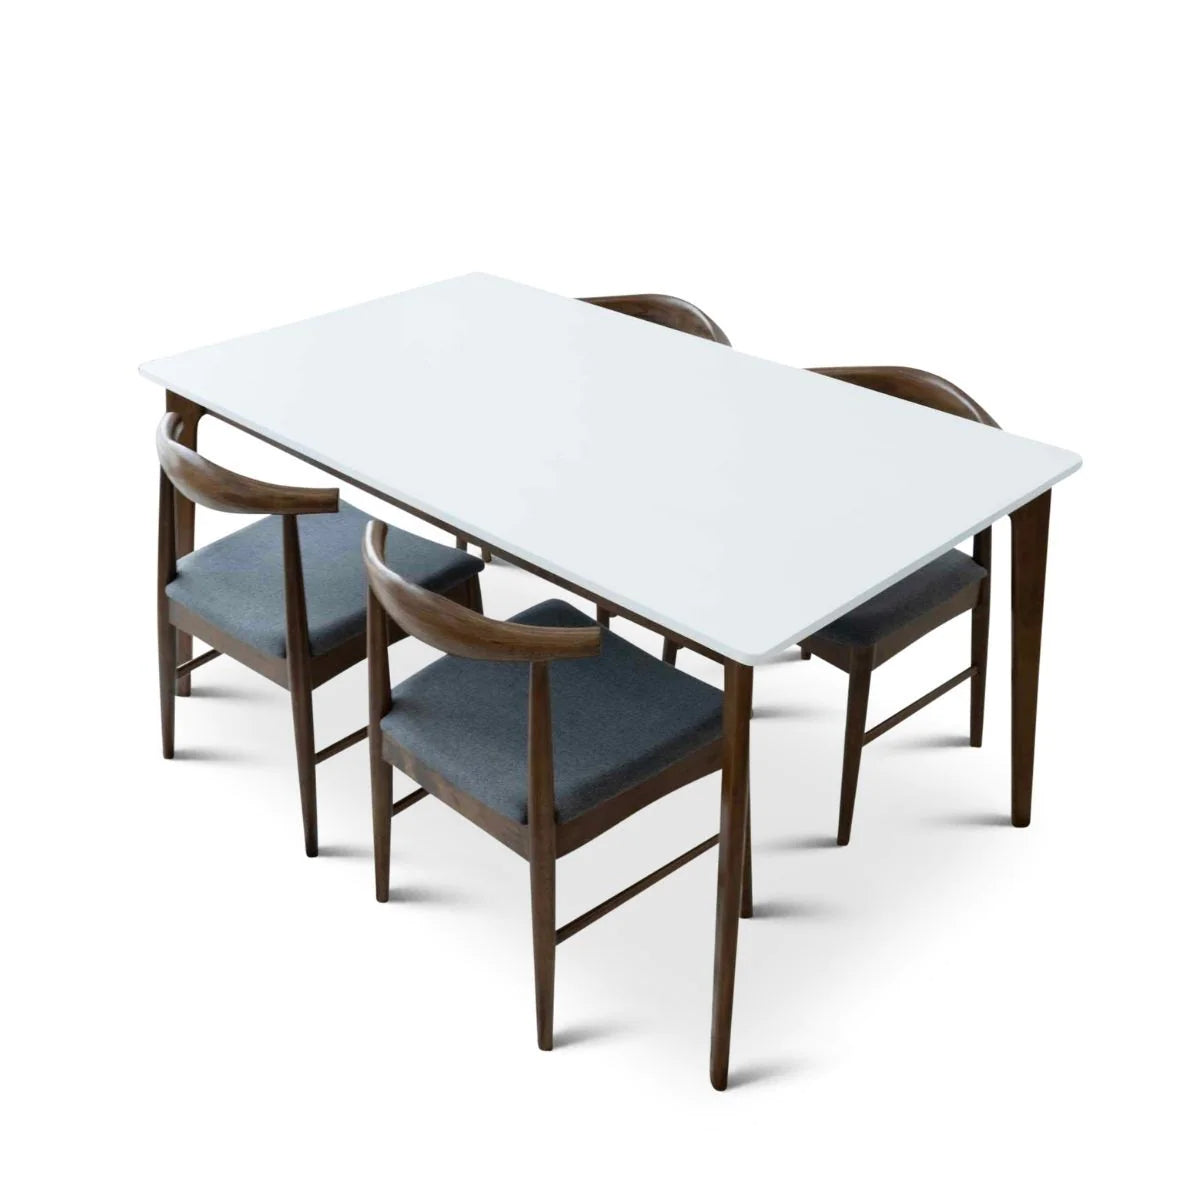 Selena Dining set with 4 Winston Grey Dining Chairs (White Top)